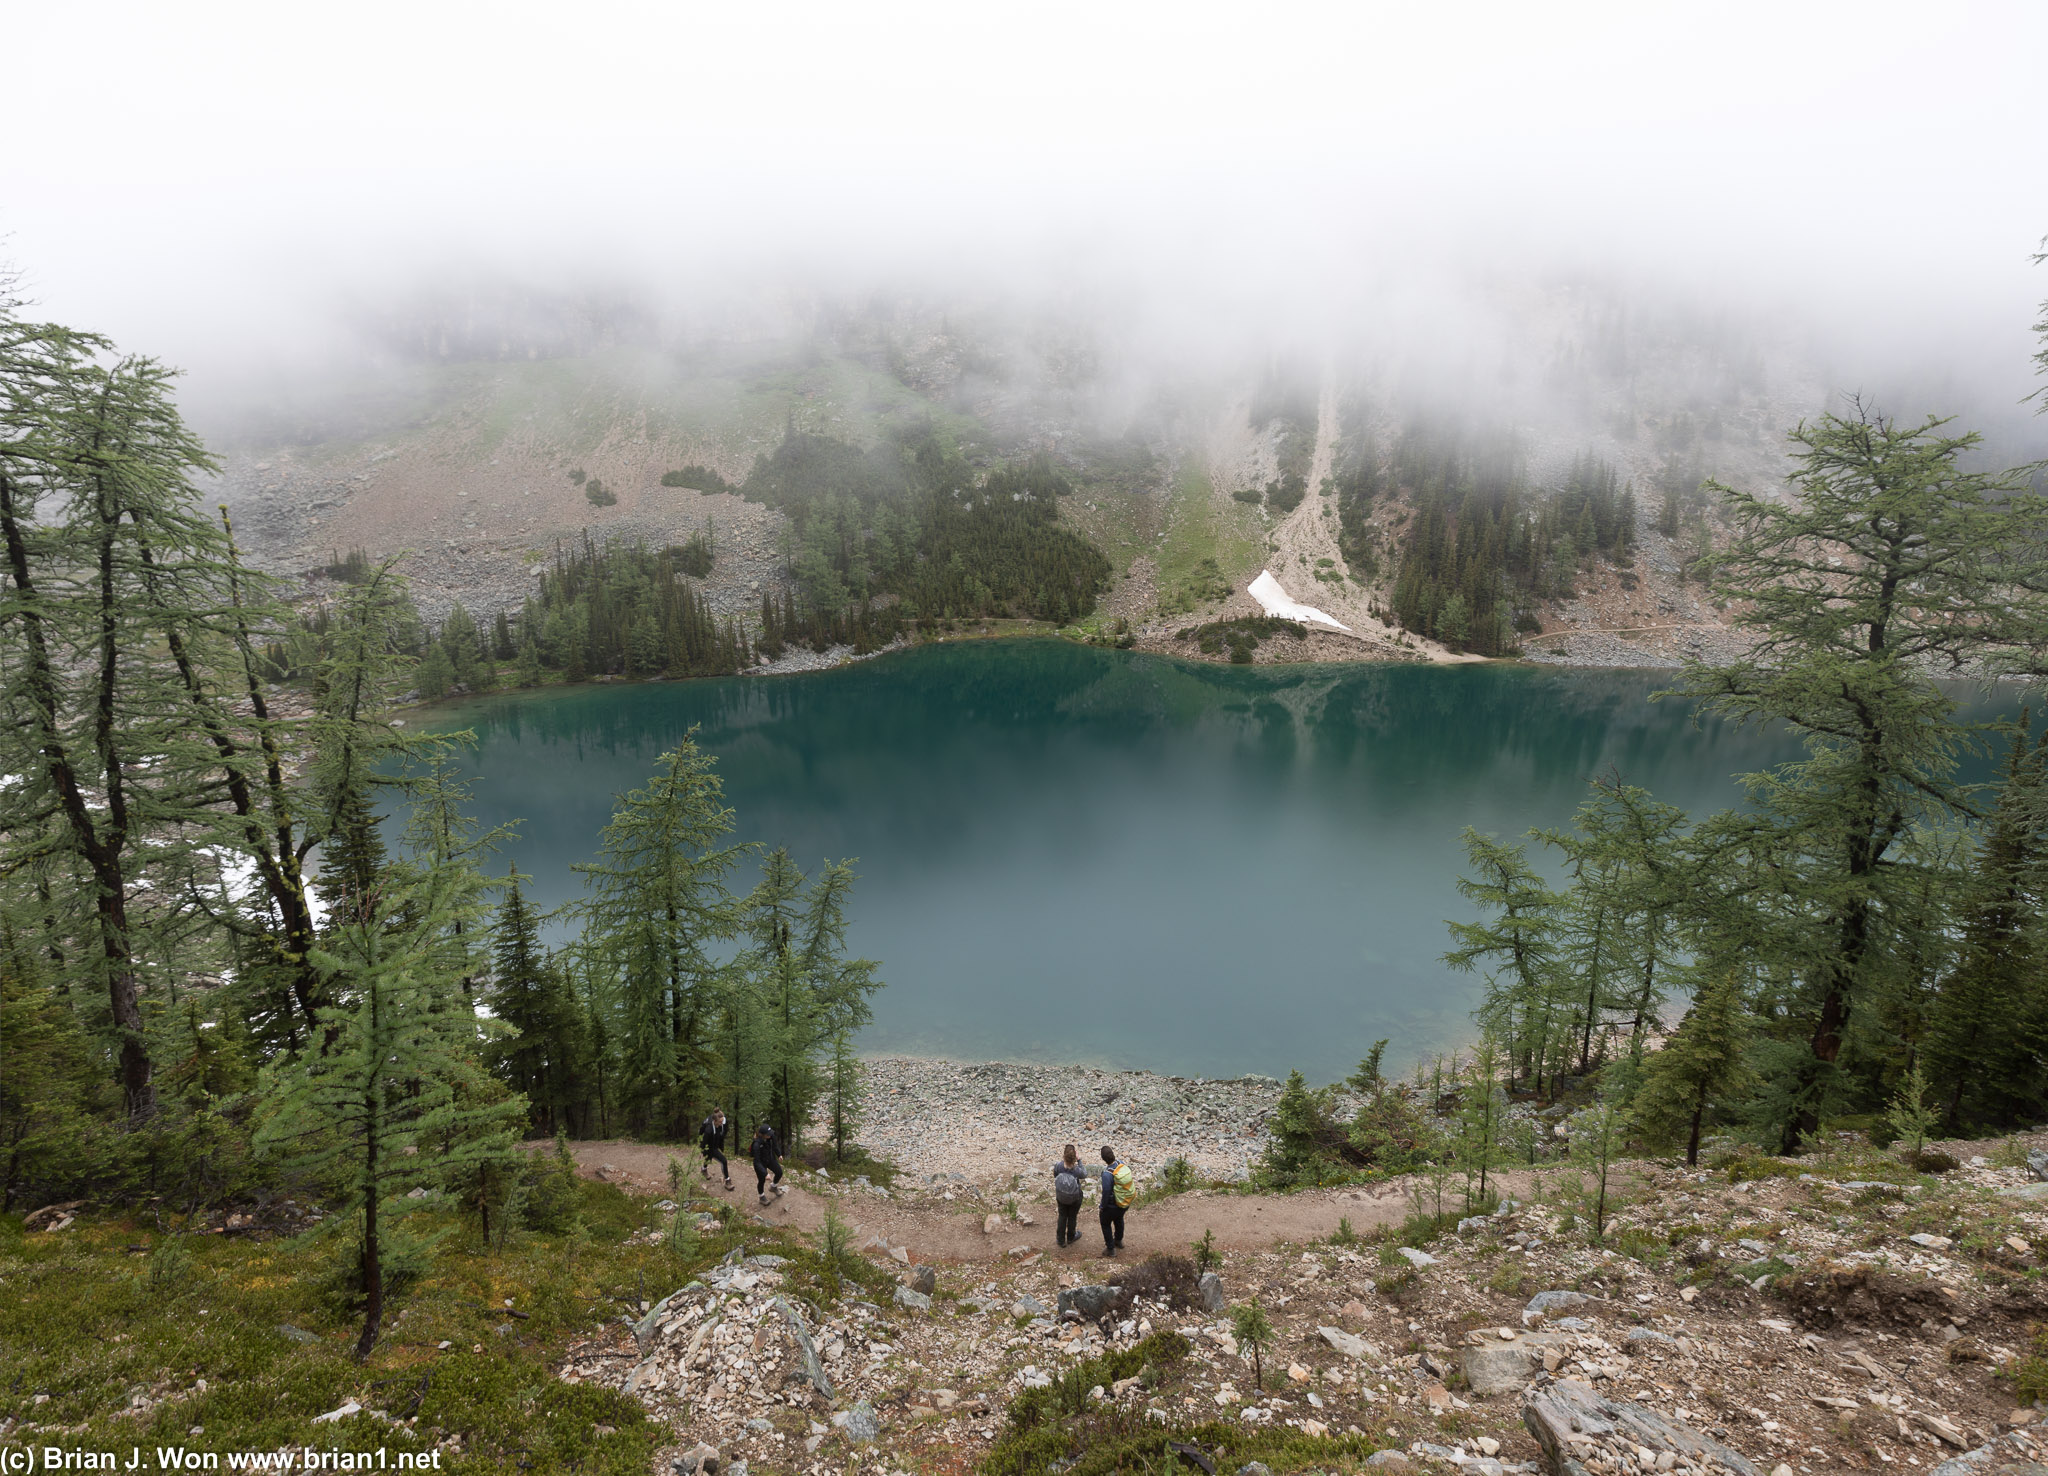 Lake Agnes reveals itself through the clouds.